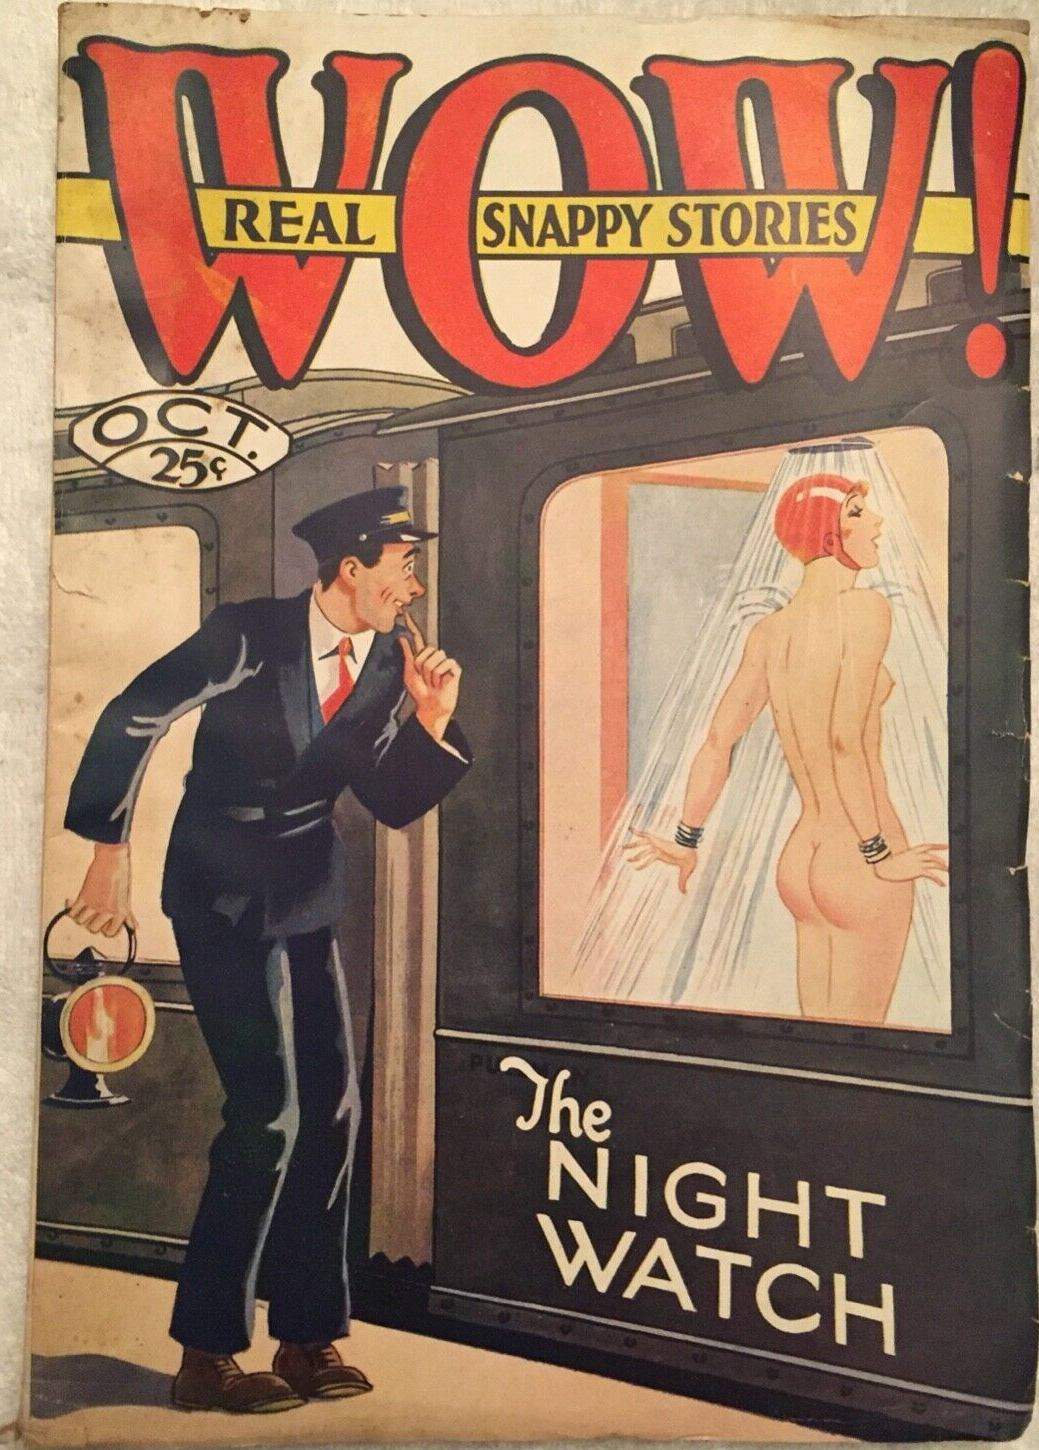 Wow! Real Snappy Stories - October 1930